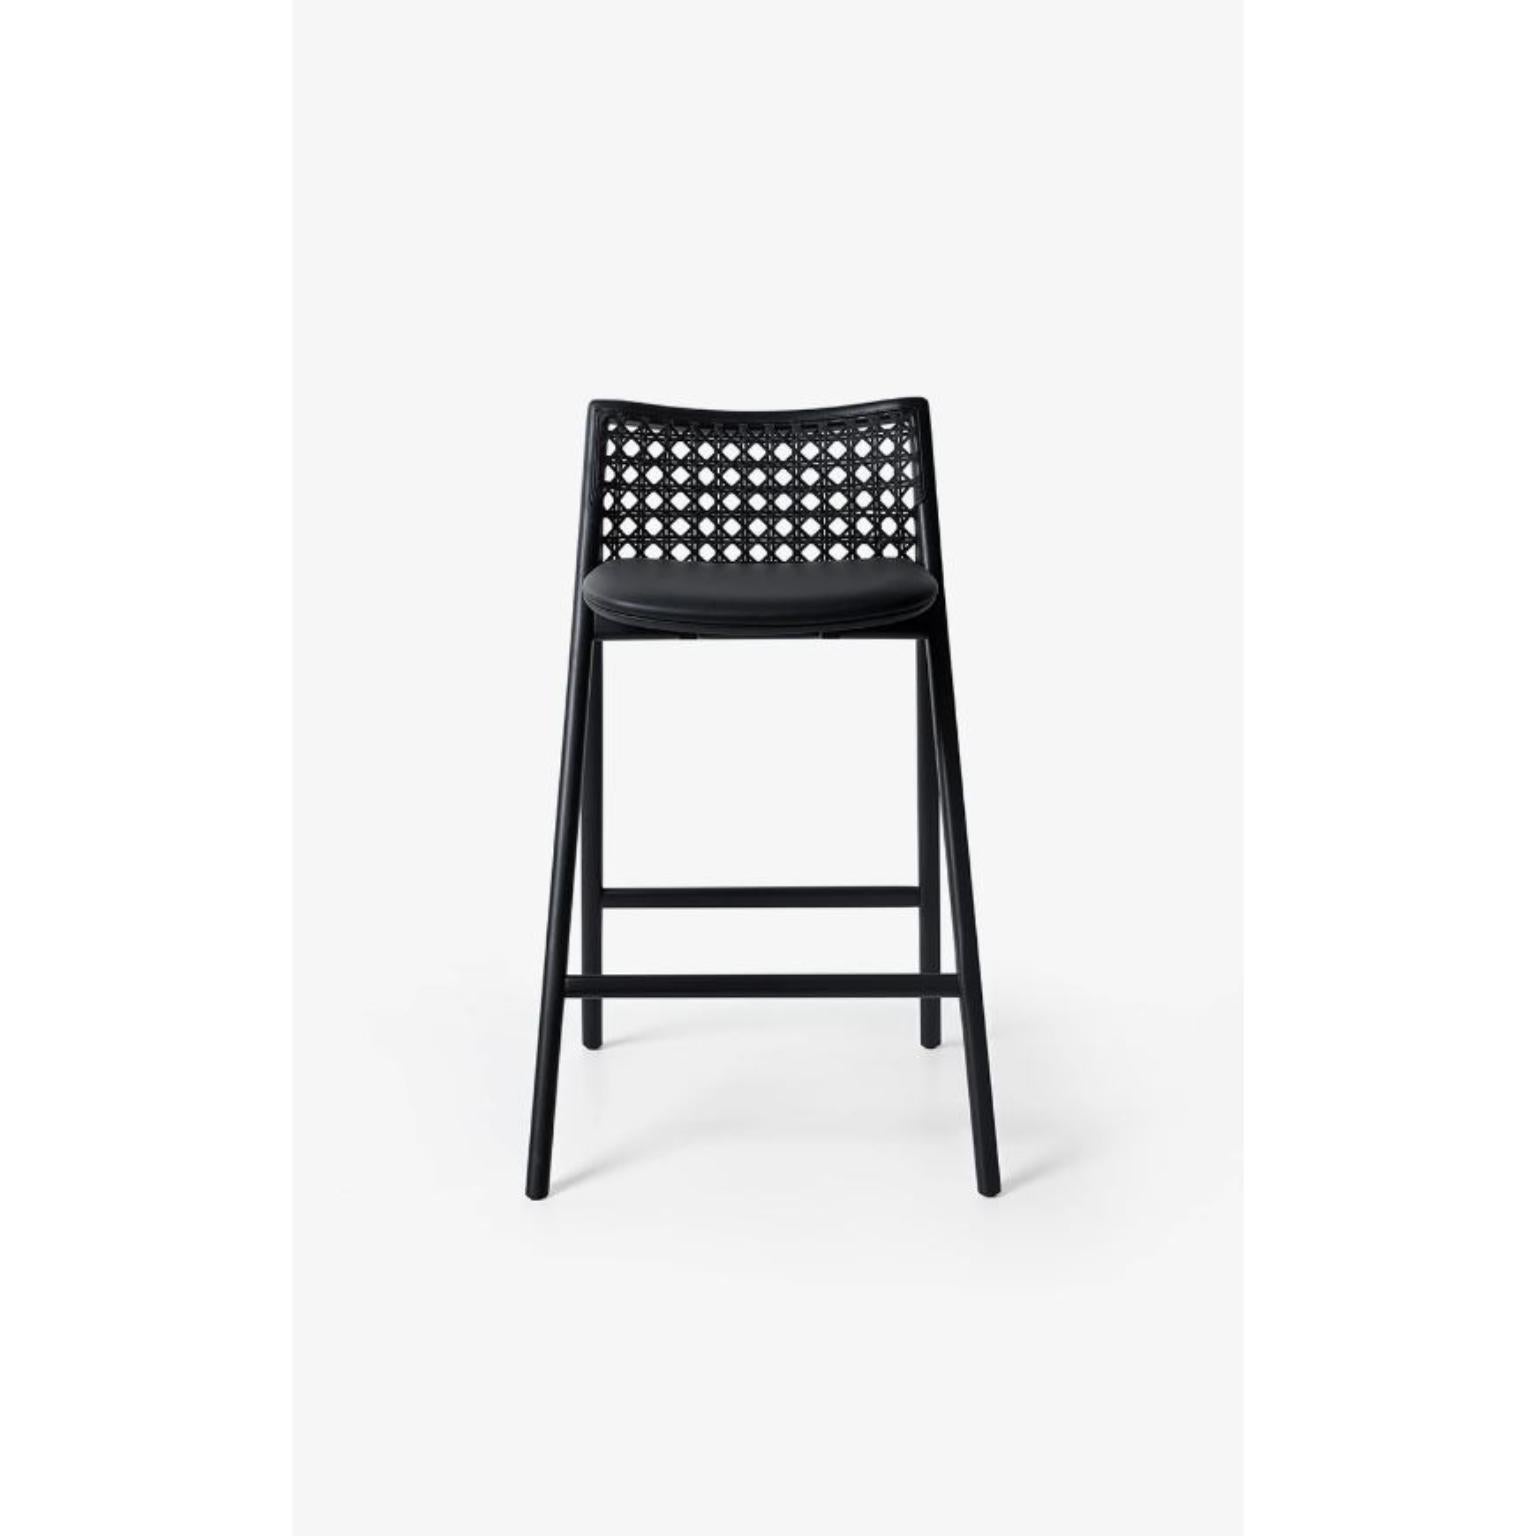 Black Tela Bar Stool by Wentz
Dimensions: D 58 x W 60 x H 94 cm
Materials: Tauari Wood, Cotton, Weave, Plywood, Upholstery.
Weight: 6,1kg / 13,4 lbs

The Tela armchair is a meeting between contemporary design and traditional Brazilian materials. The